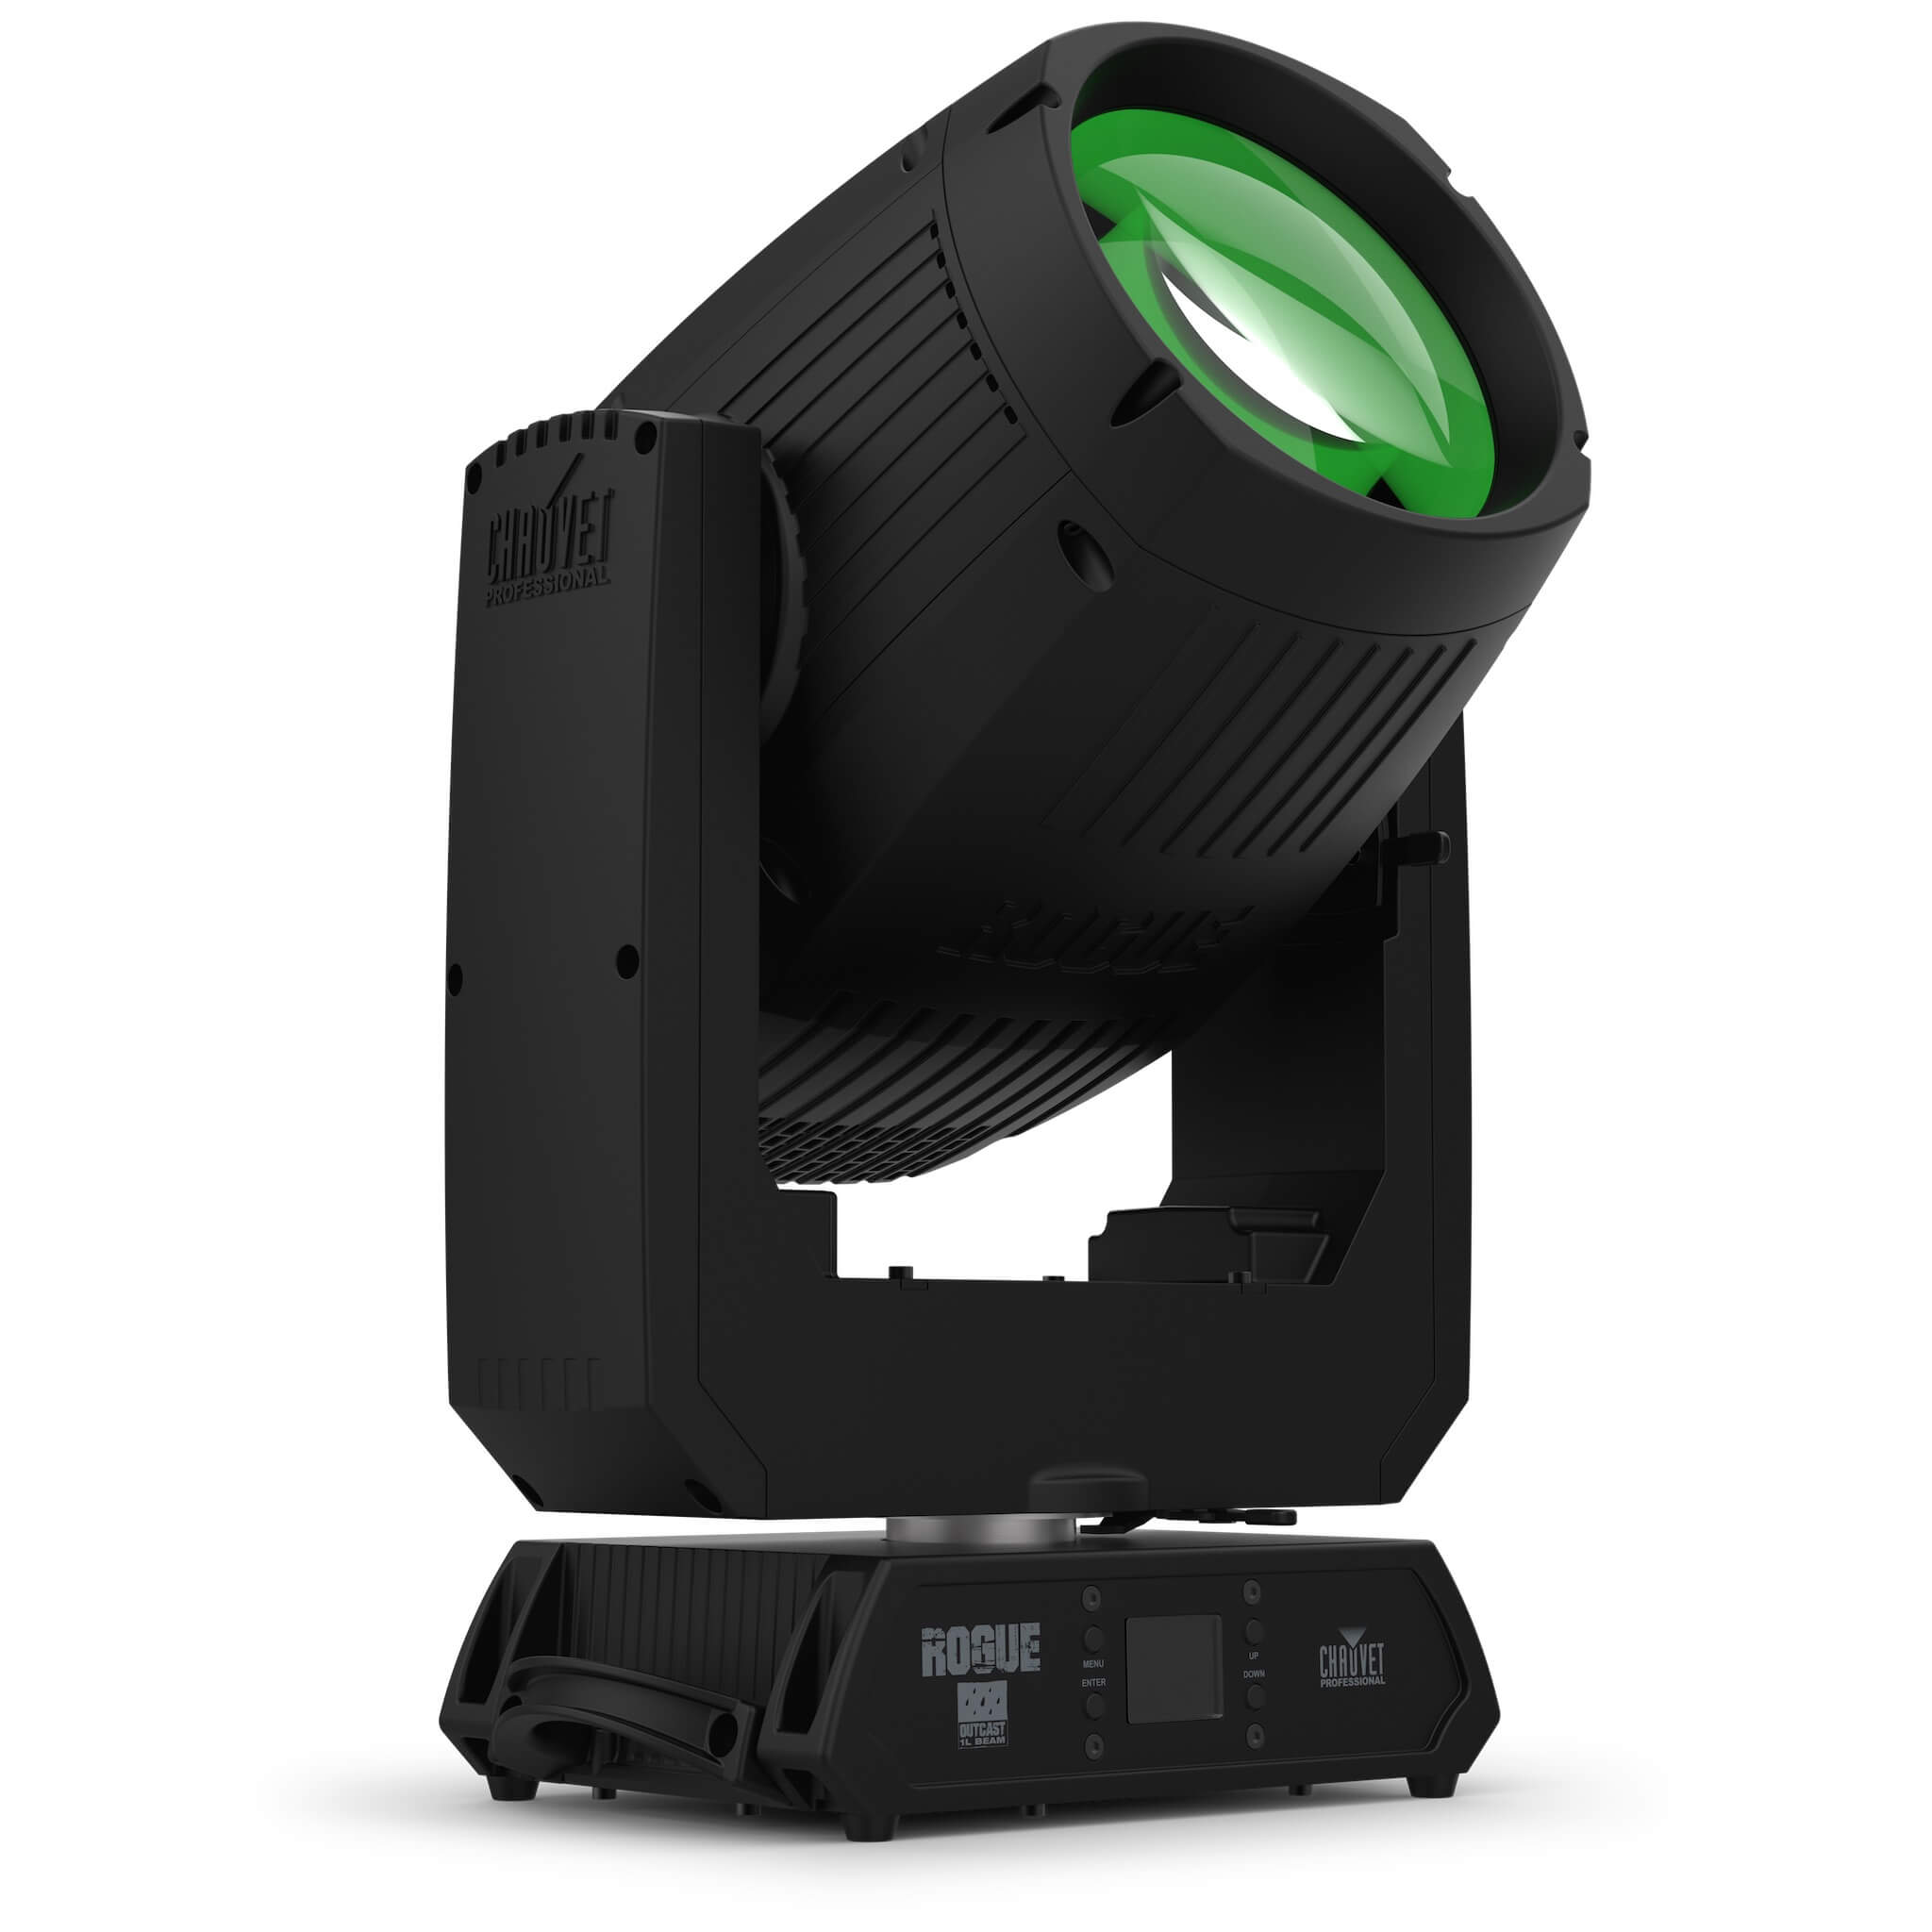 Chauvet Professional Rogue Outcast 1L Beam - LED Moving Head Light, right